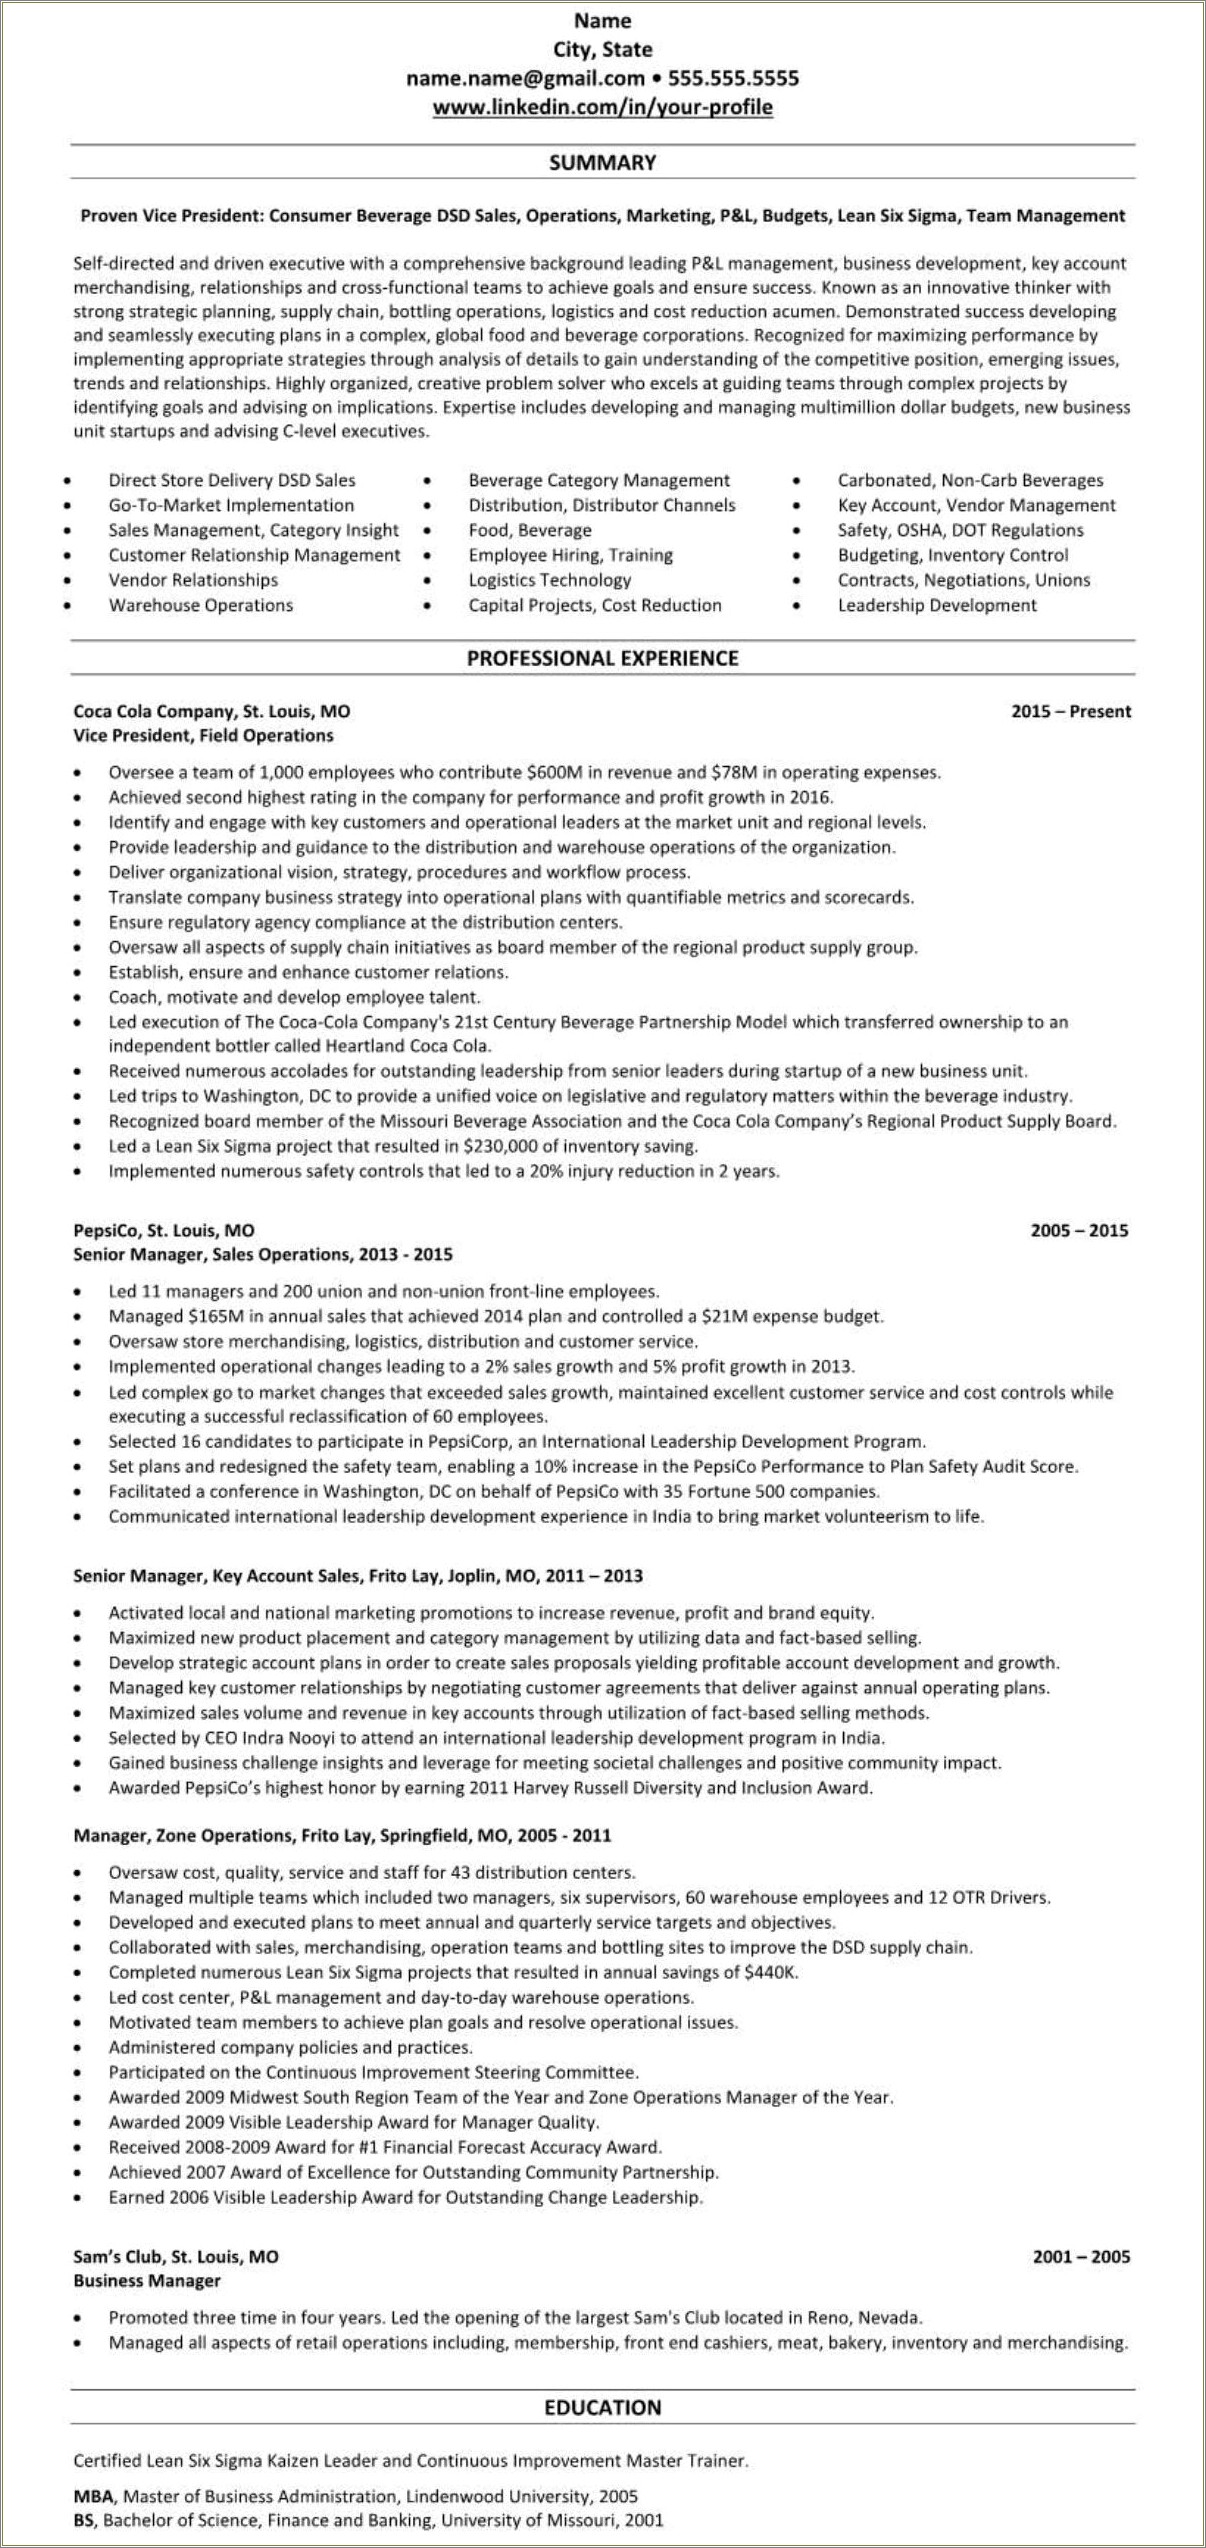 Example Of Food And Beverage Resume